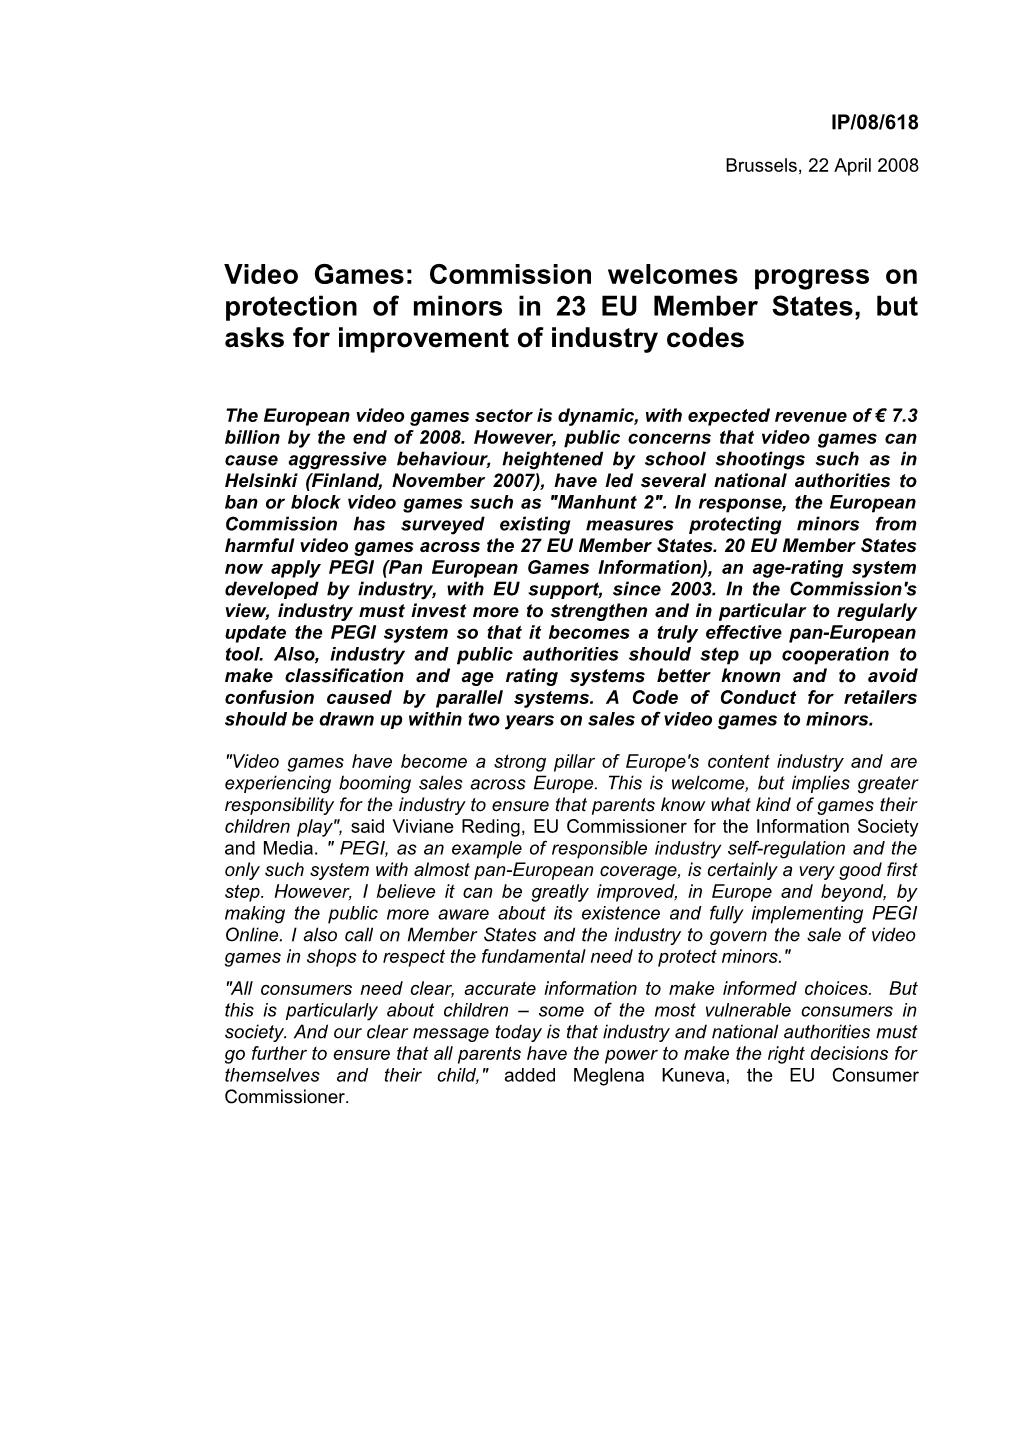 Video Games: Commission Welcomes Progress on Protection of Minors in 23 EU Member States